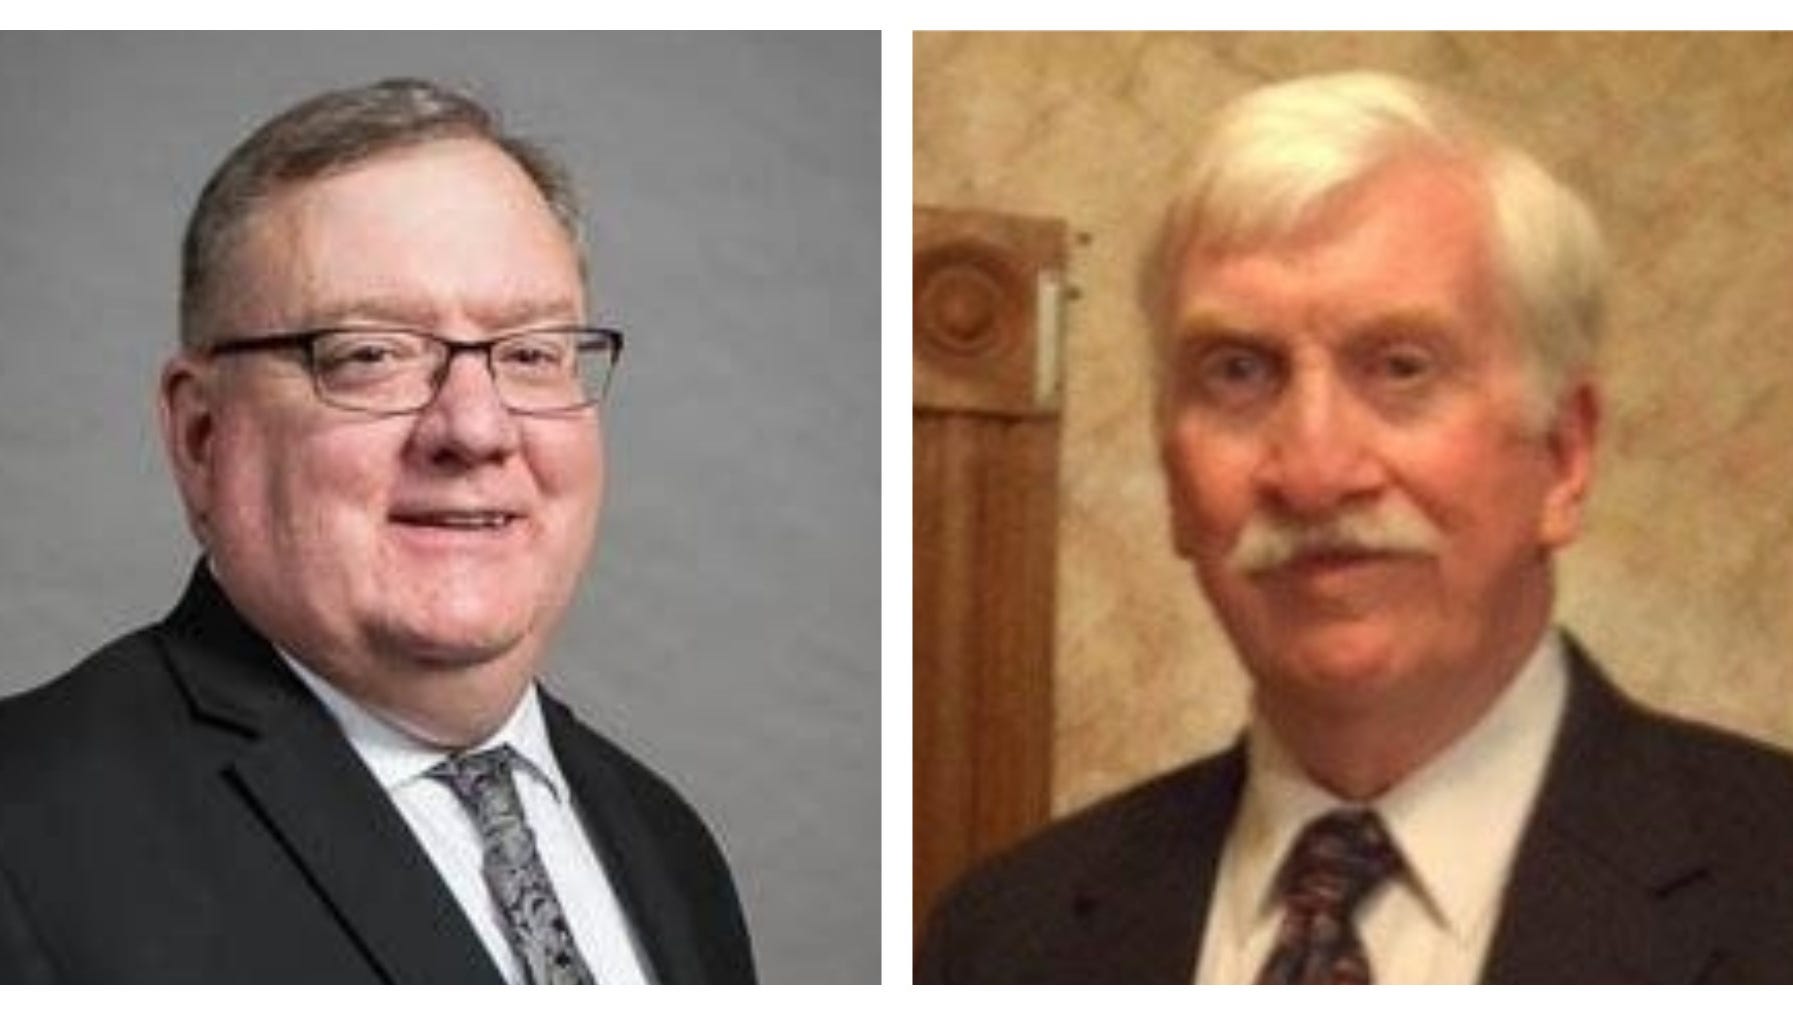 2 Former Braintree Town Councilors Are Running For Office Again